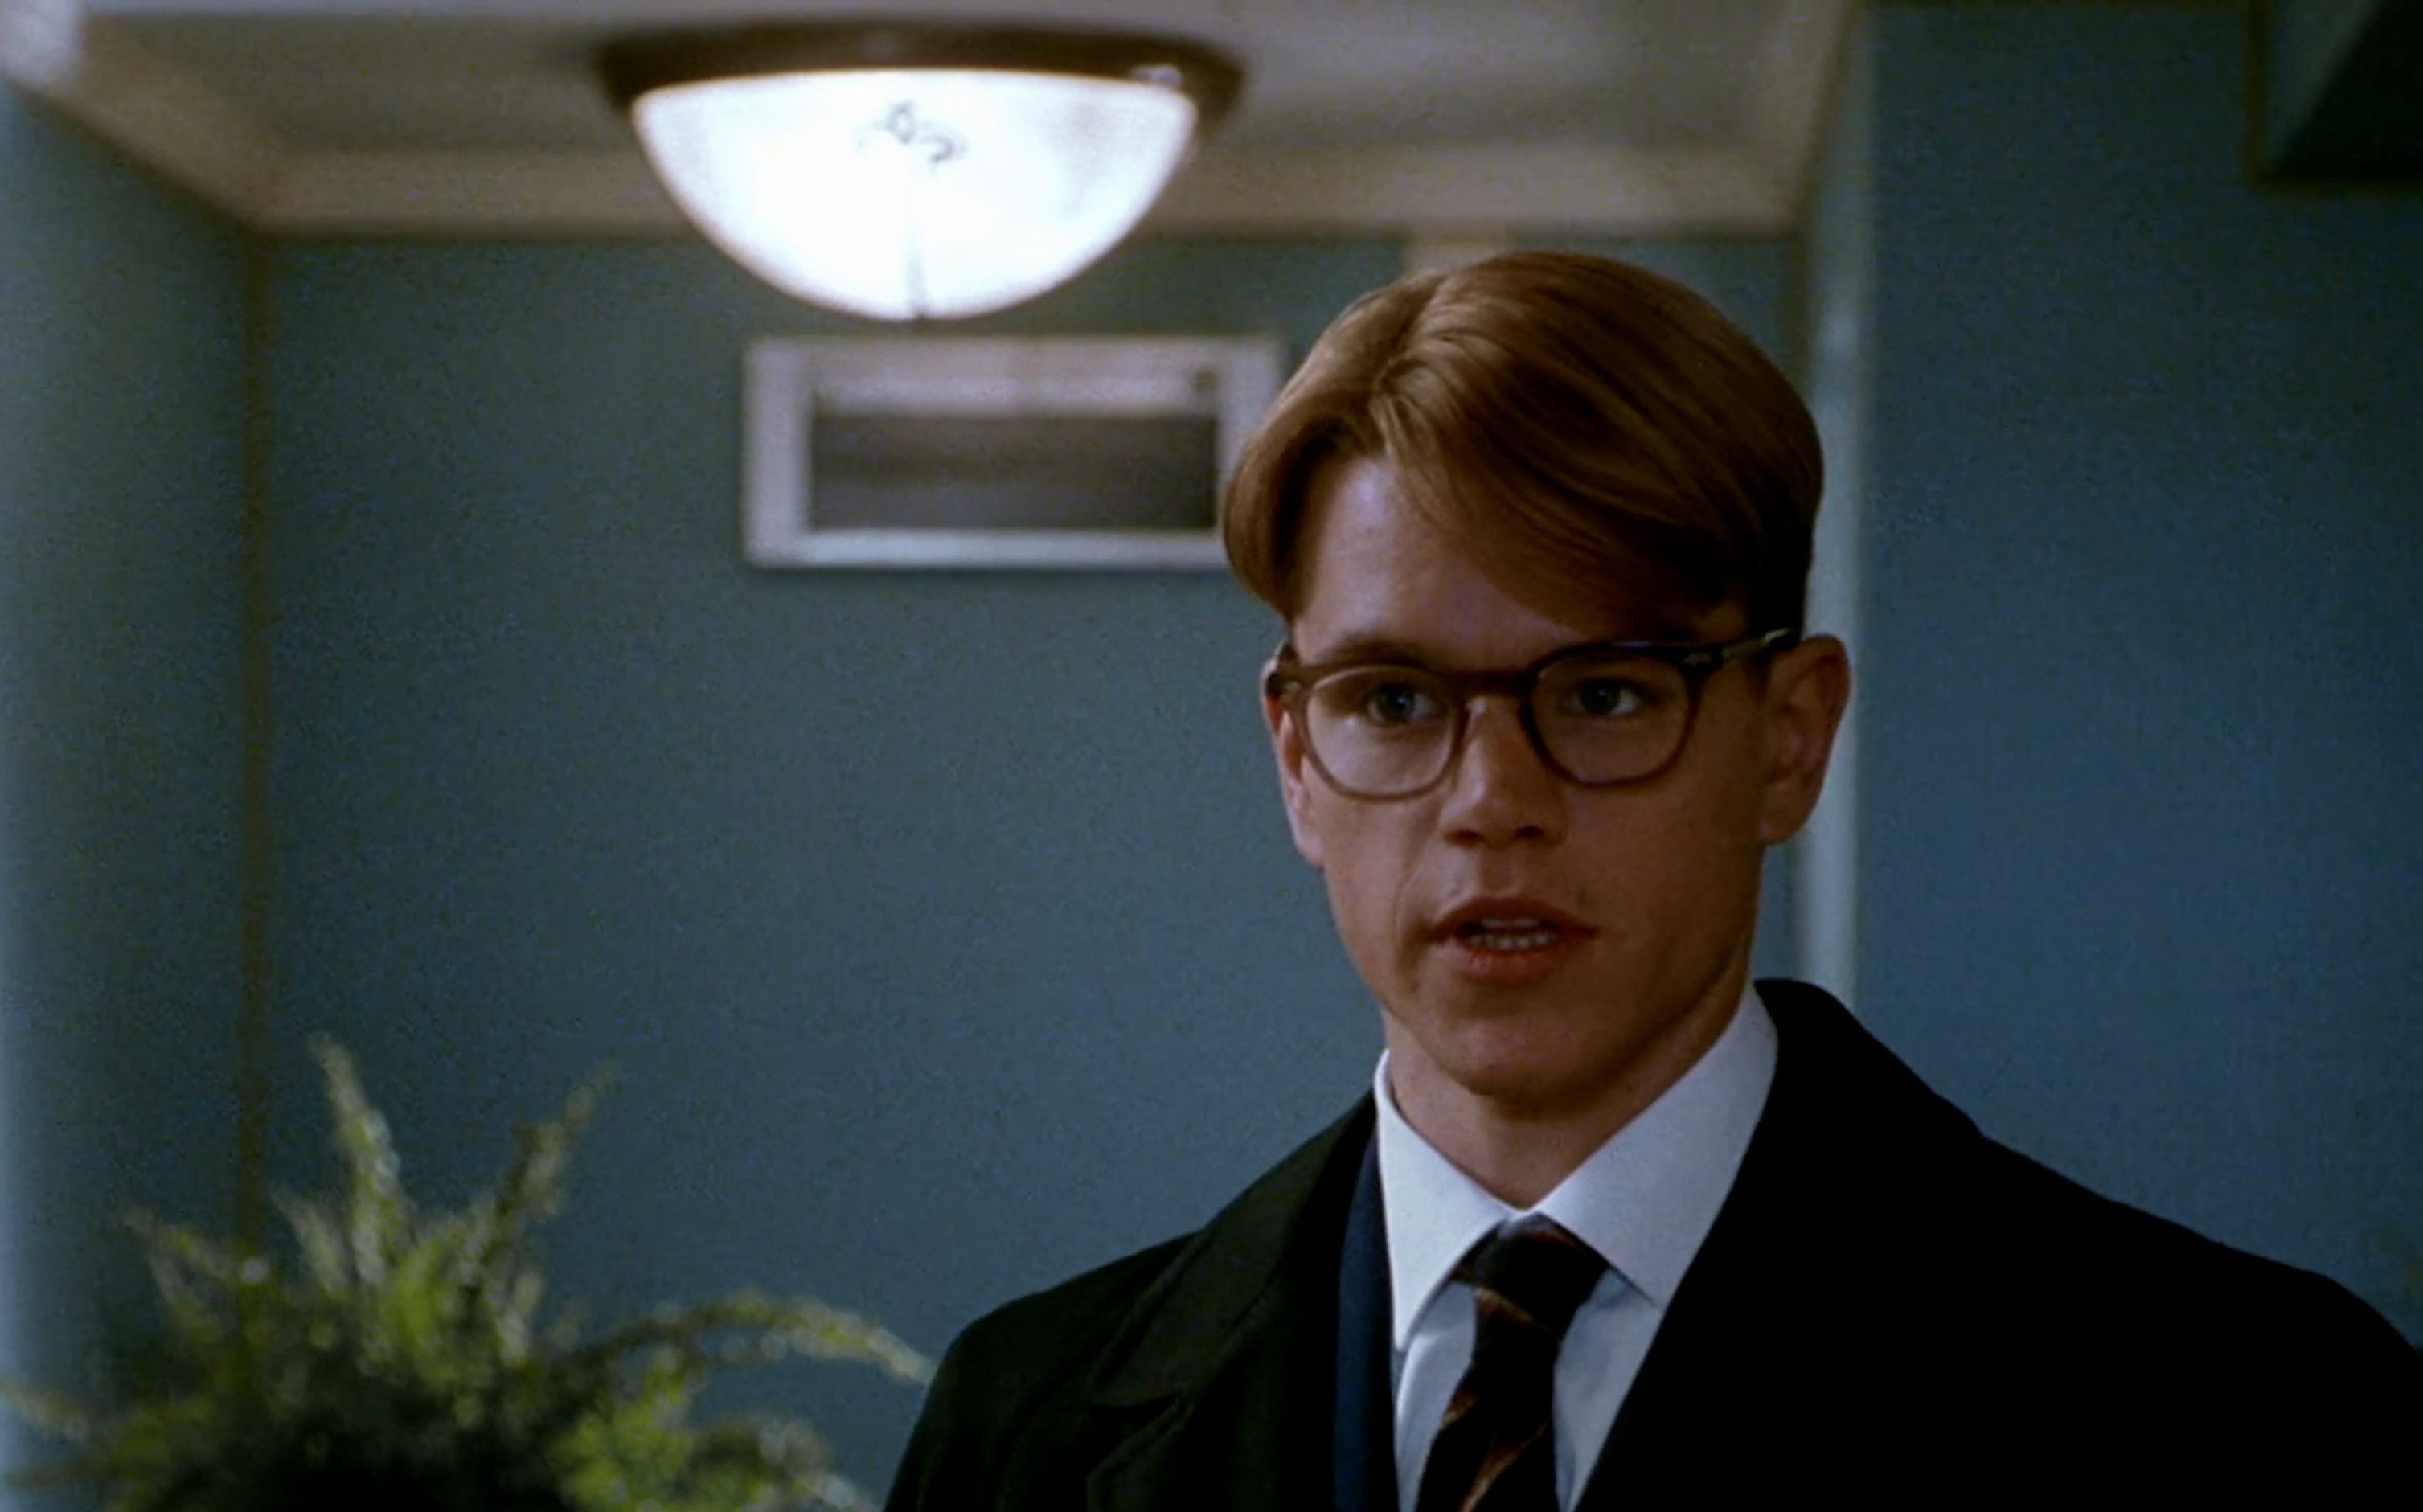 Inspired: The Talented Mr. Ripley, by Bras Croisé